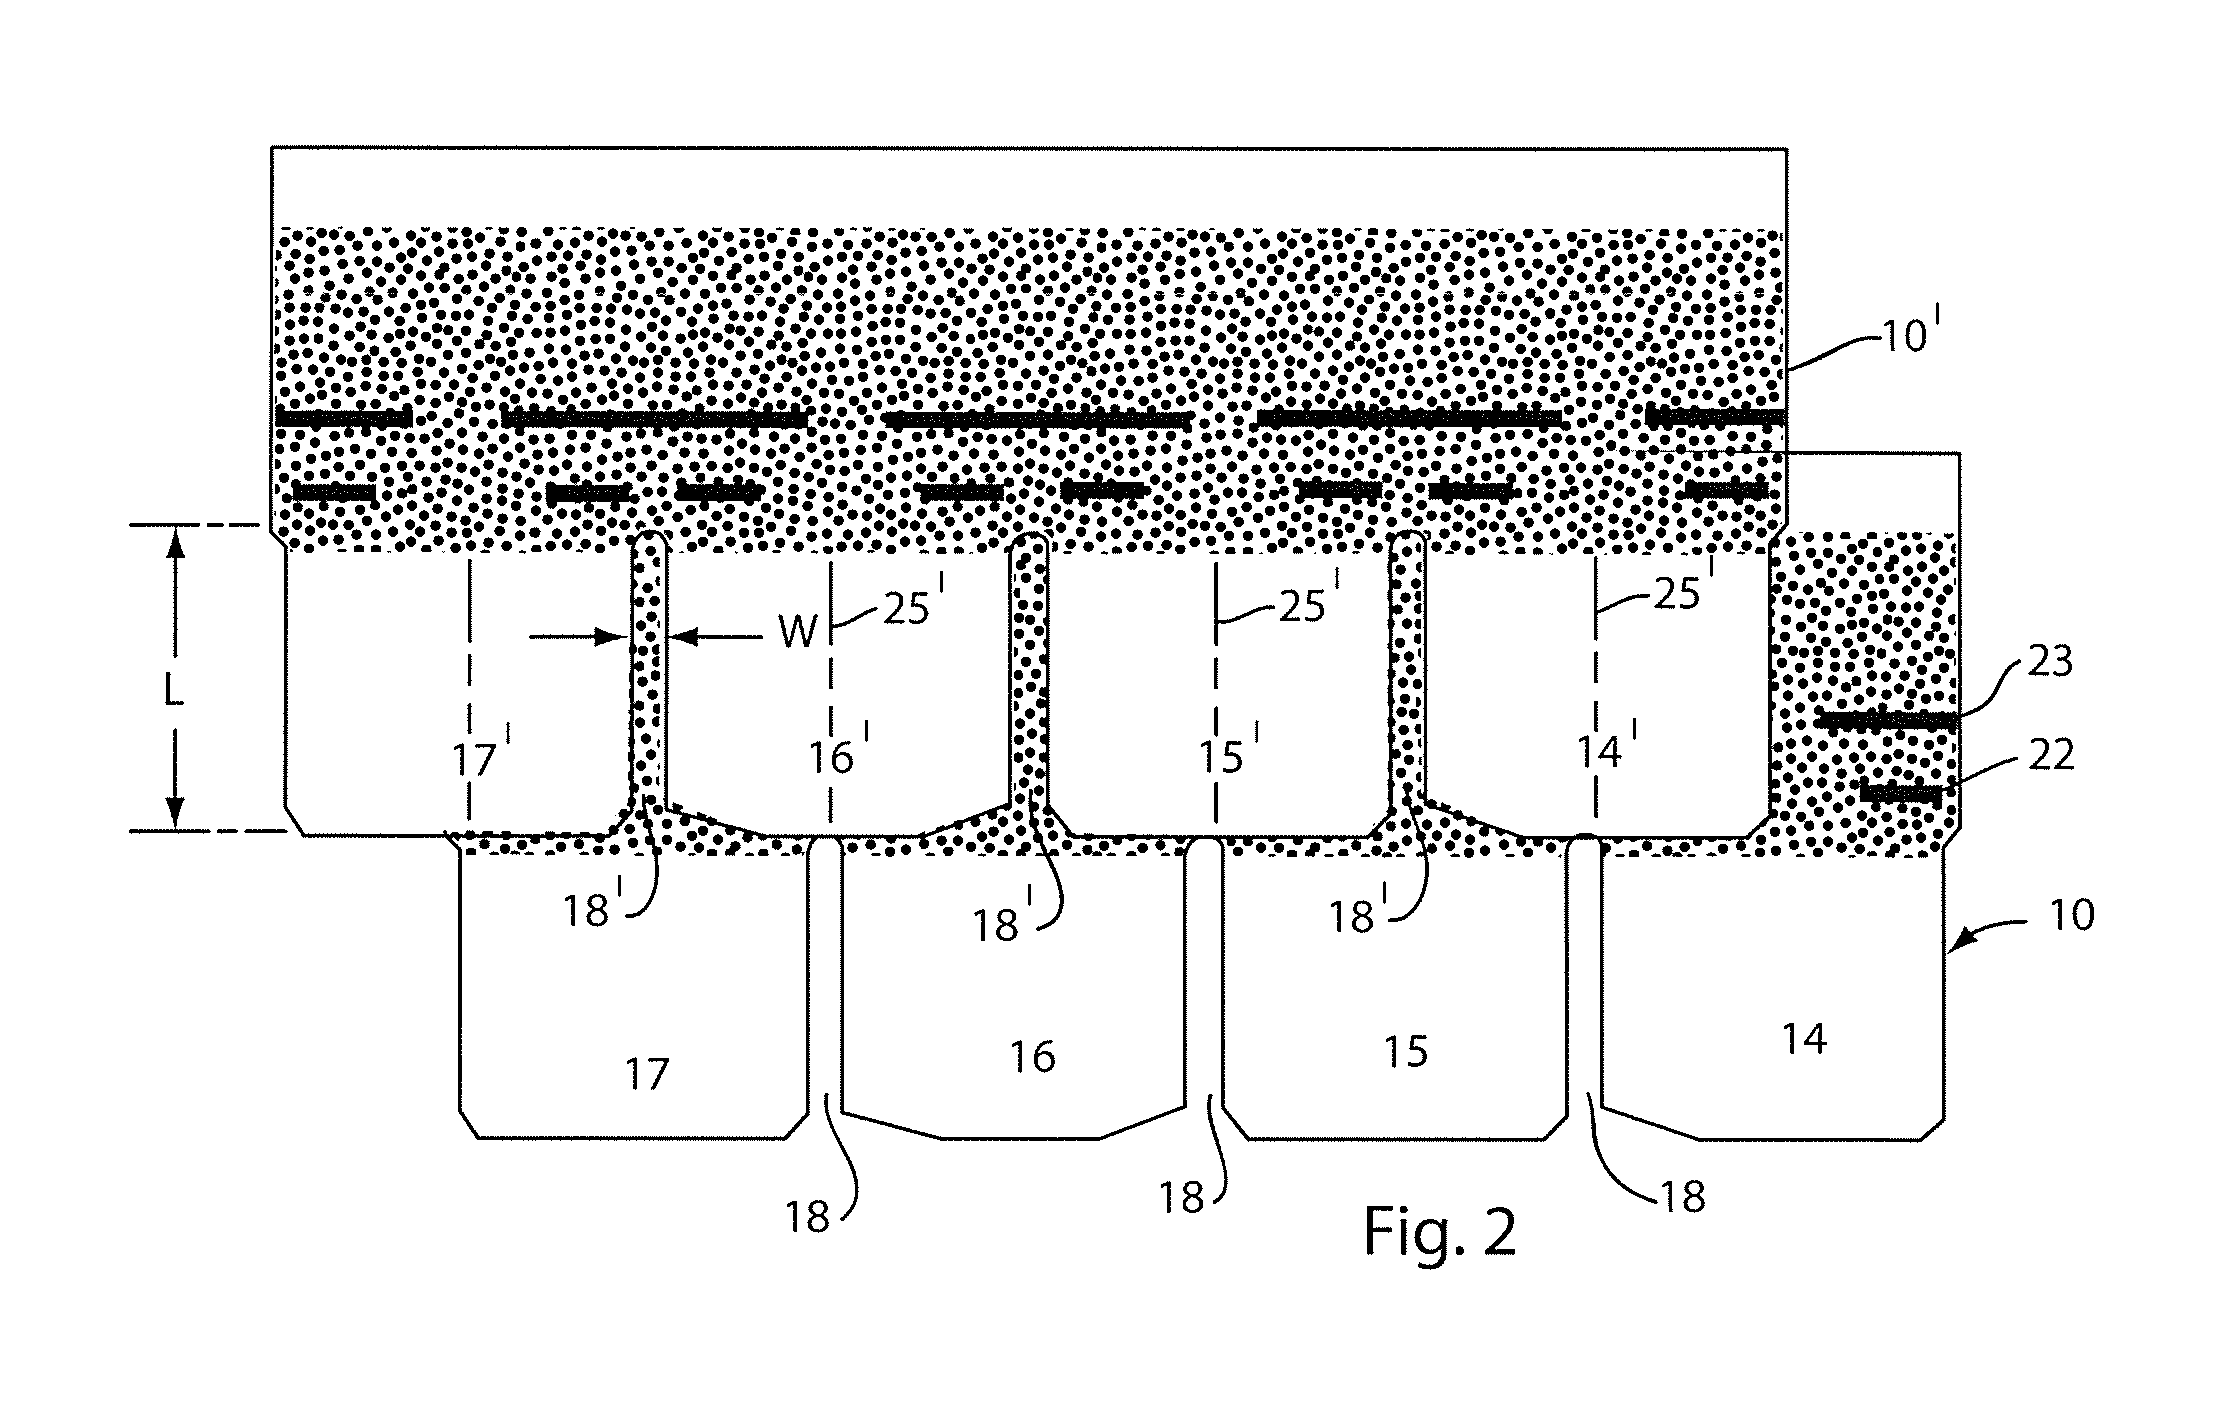 Asphalt Shingle, Roof Covering Therewith And Method Of Making The Same With Synchronized Adhesive Positioning Thereon